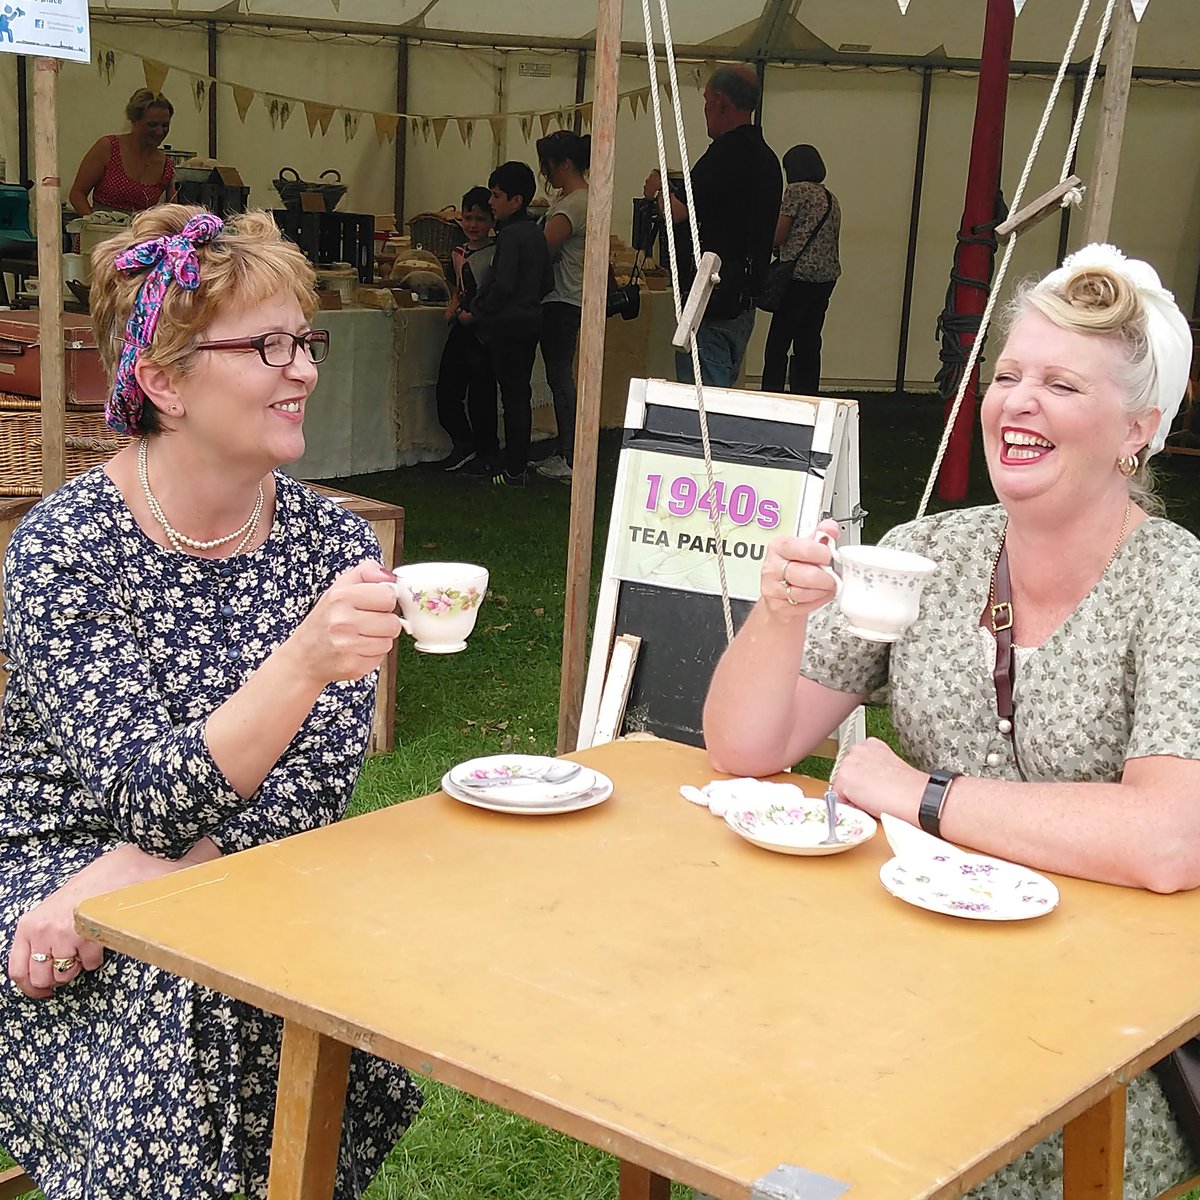 Boston 1940s event is in full swing in the park! #1940s #40s #afternoontea #eventsinboston #Boston #Lincolnshire #teatent #vintage #1940sfashion